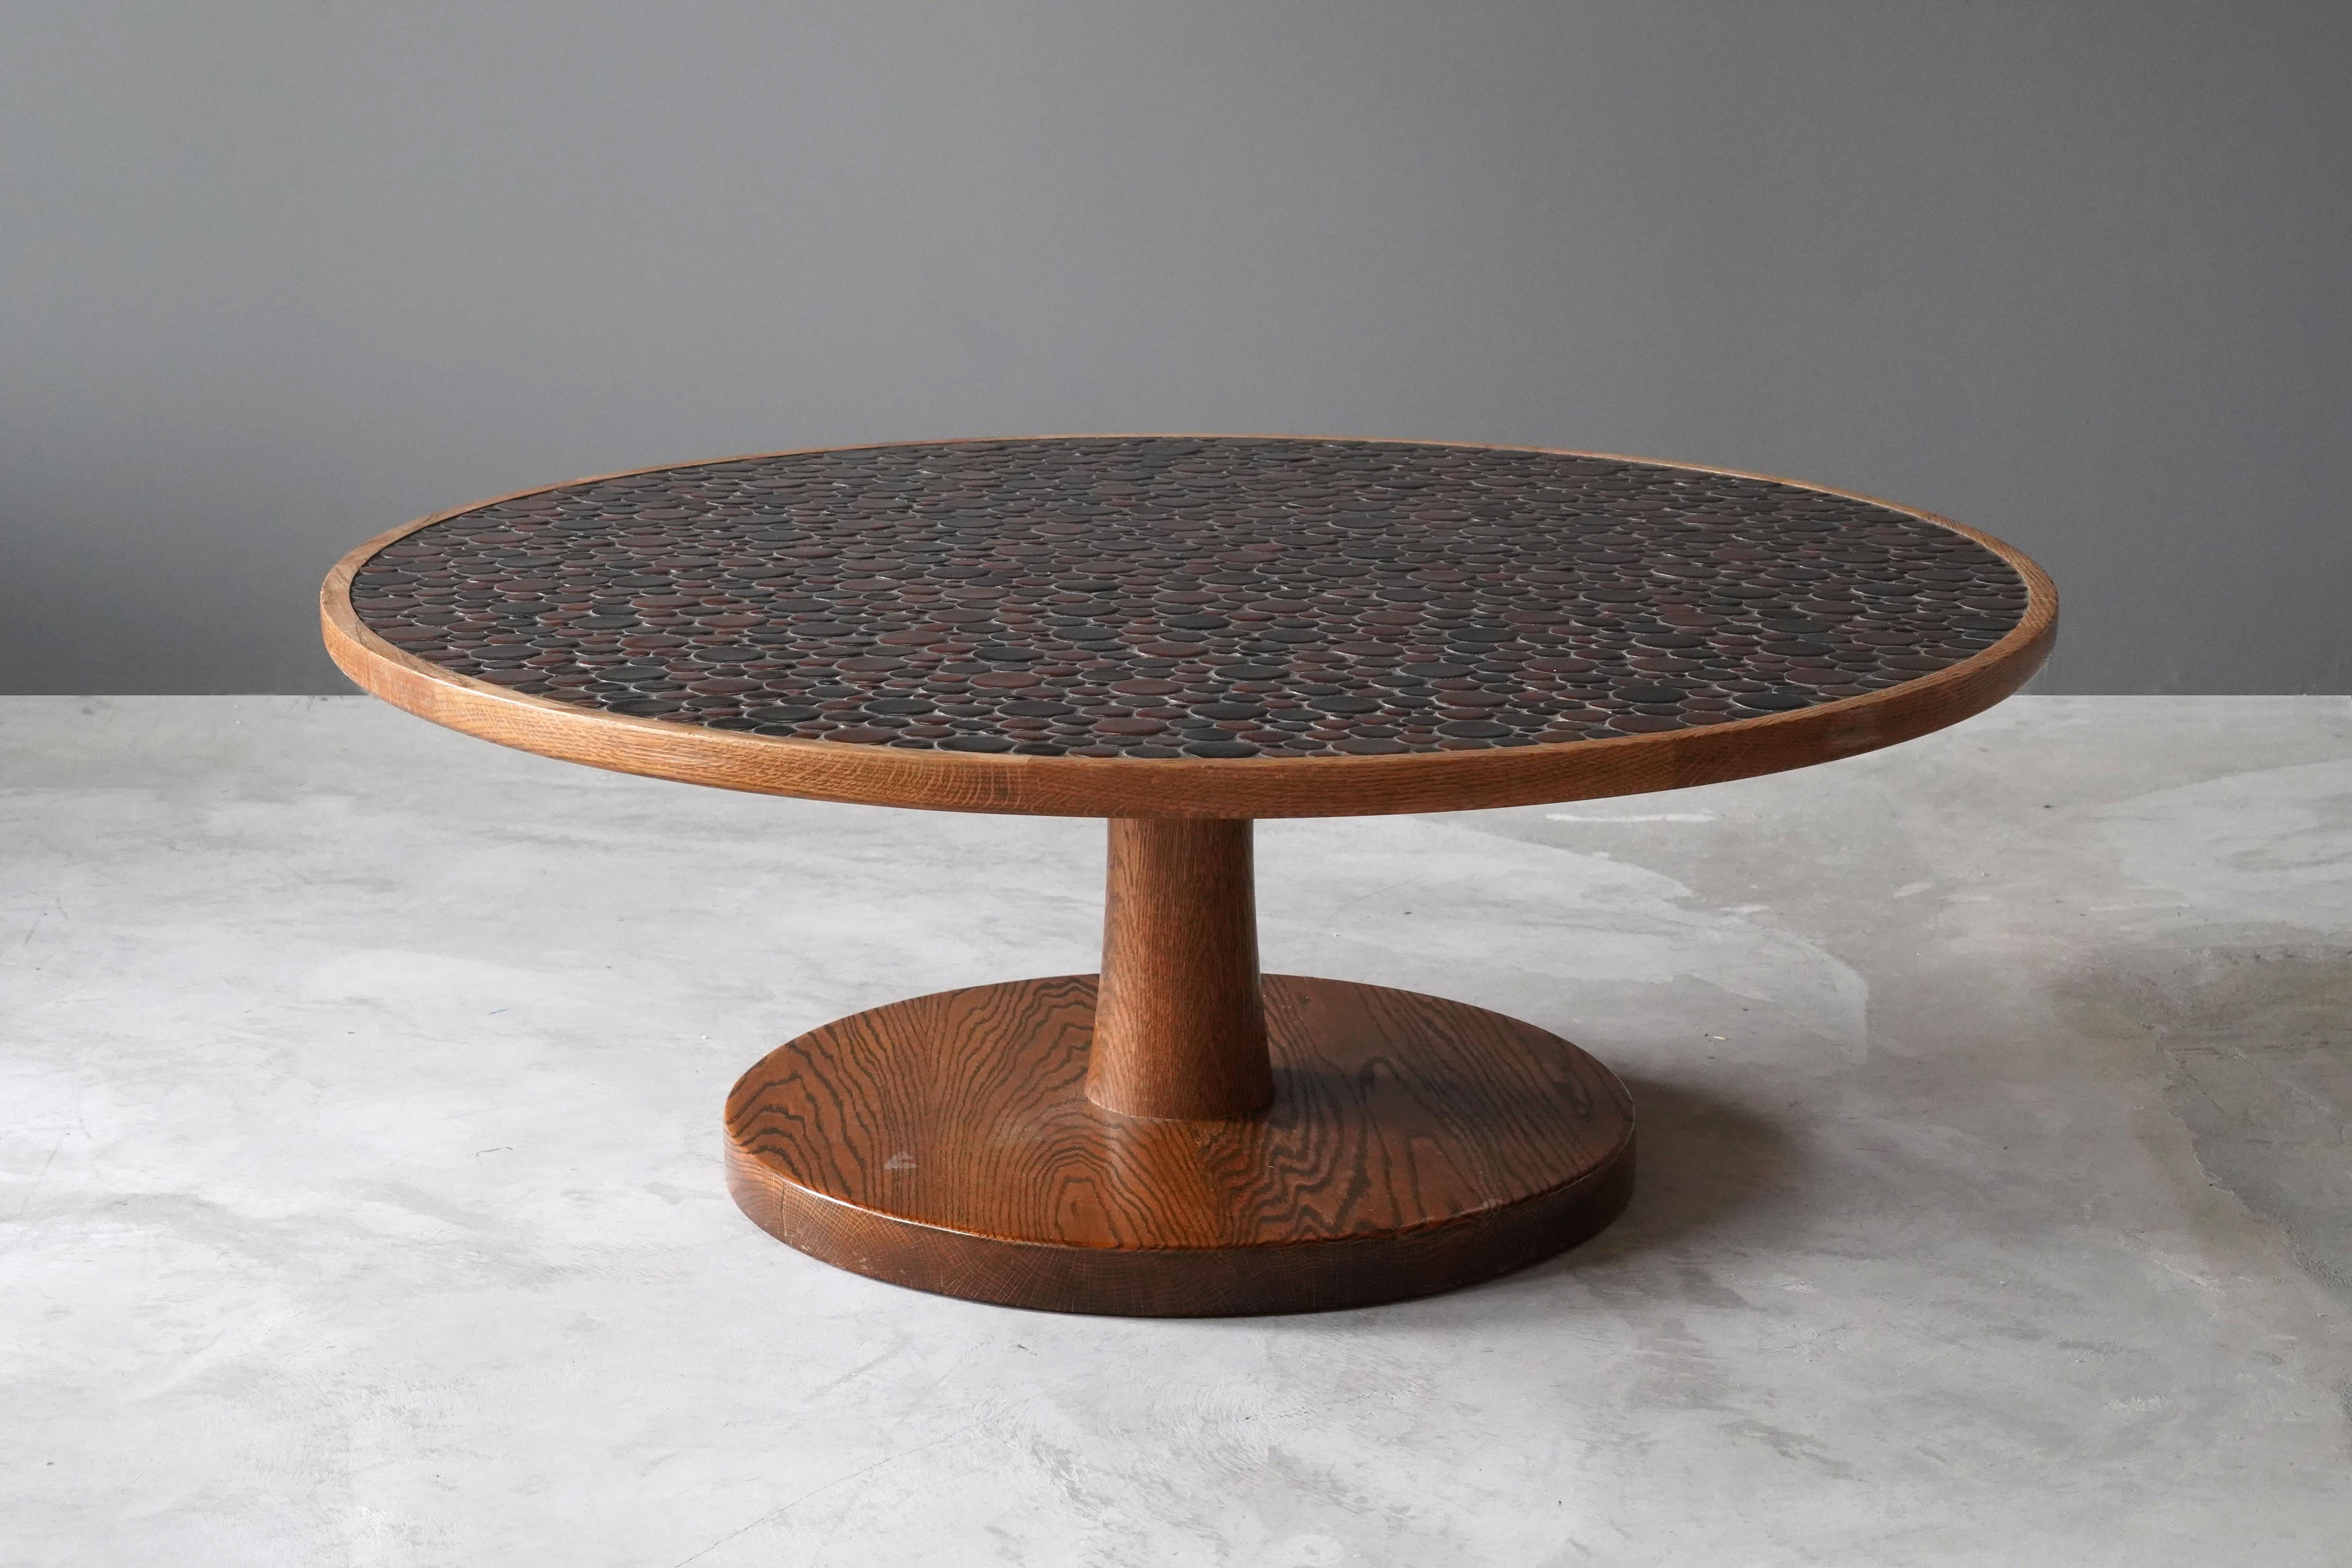 A coffee / cocktail table, designed by husband and wife duo Jane & Gordon Martz. Produced by Marshall Studios, Indianapolis. 

Small ceramic tiles are placed on the top of the oak table.

Jane & Gordon Martz works are represented in the